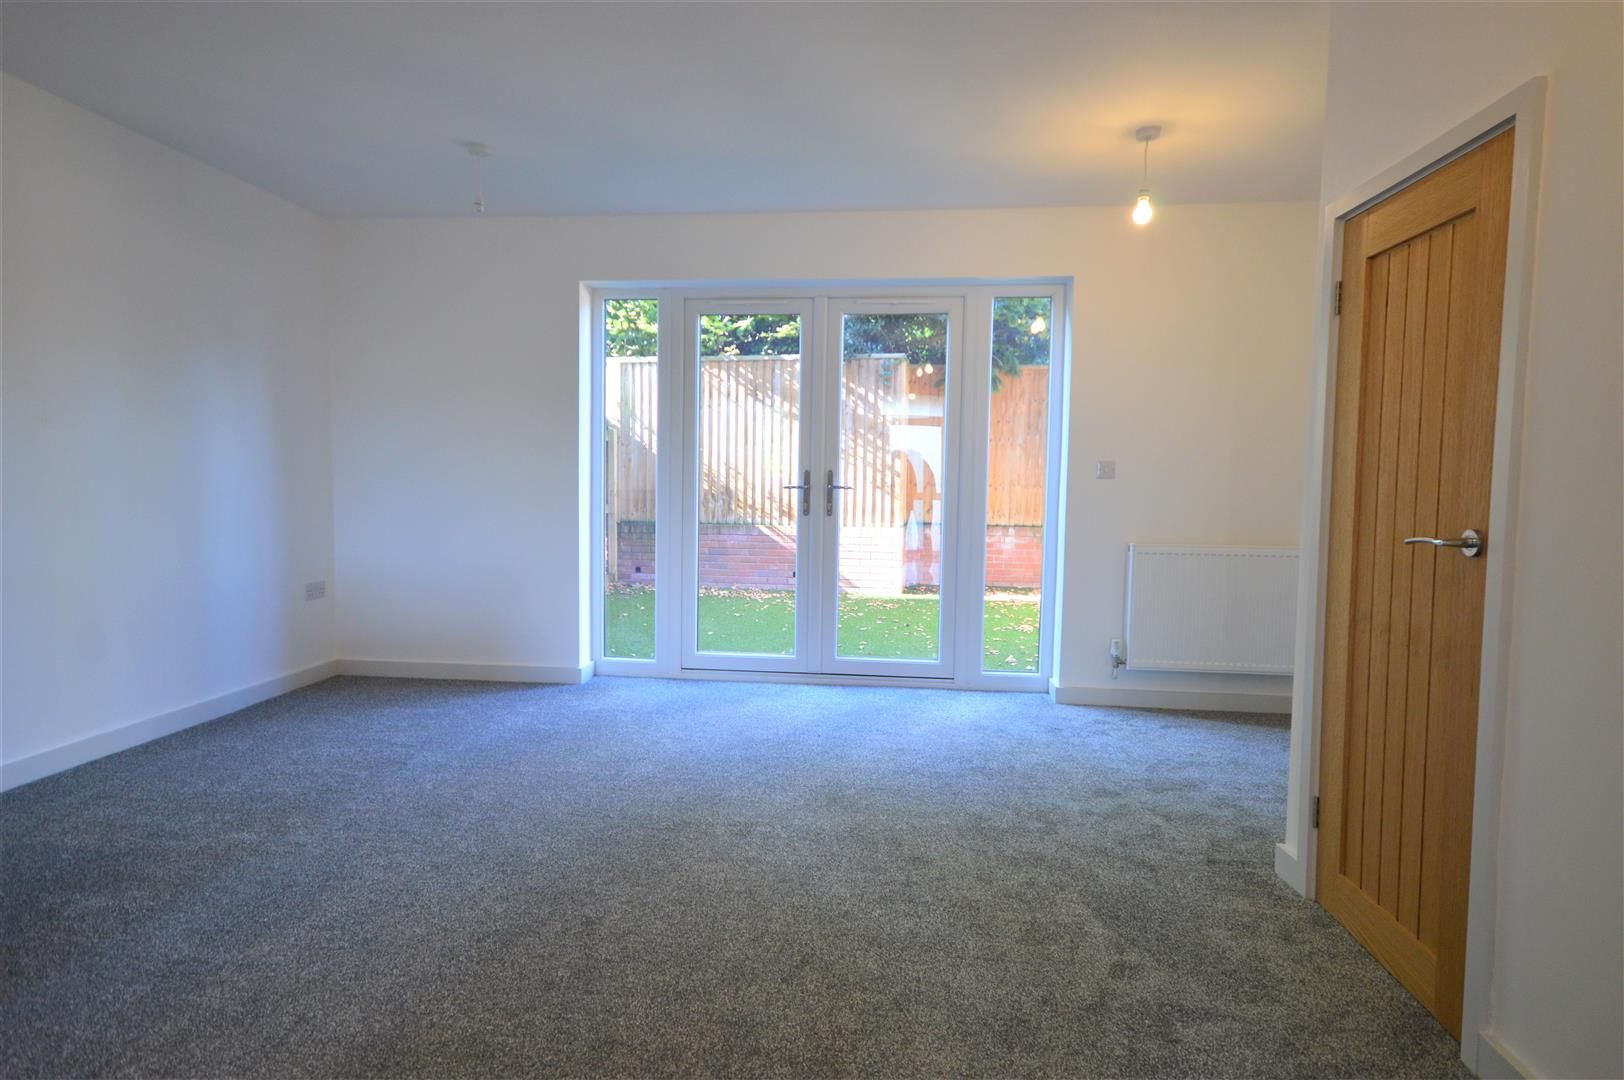 2 bed terraced for sale in Leominster  - Property Image 3